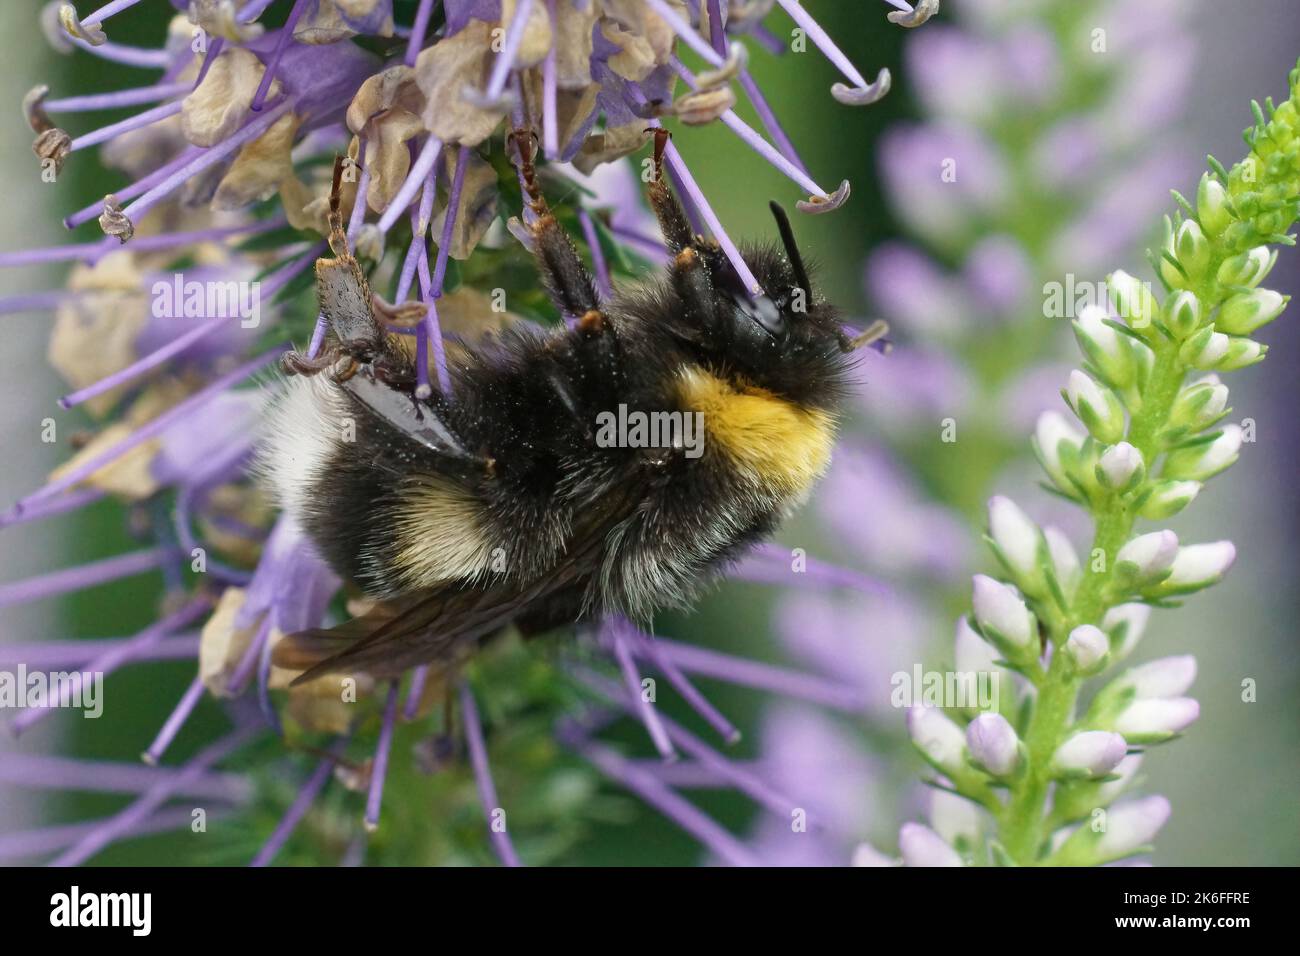 A closeup of Bombus terrestris bee sipping nectar from flower Stock Photo